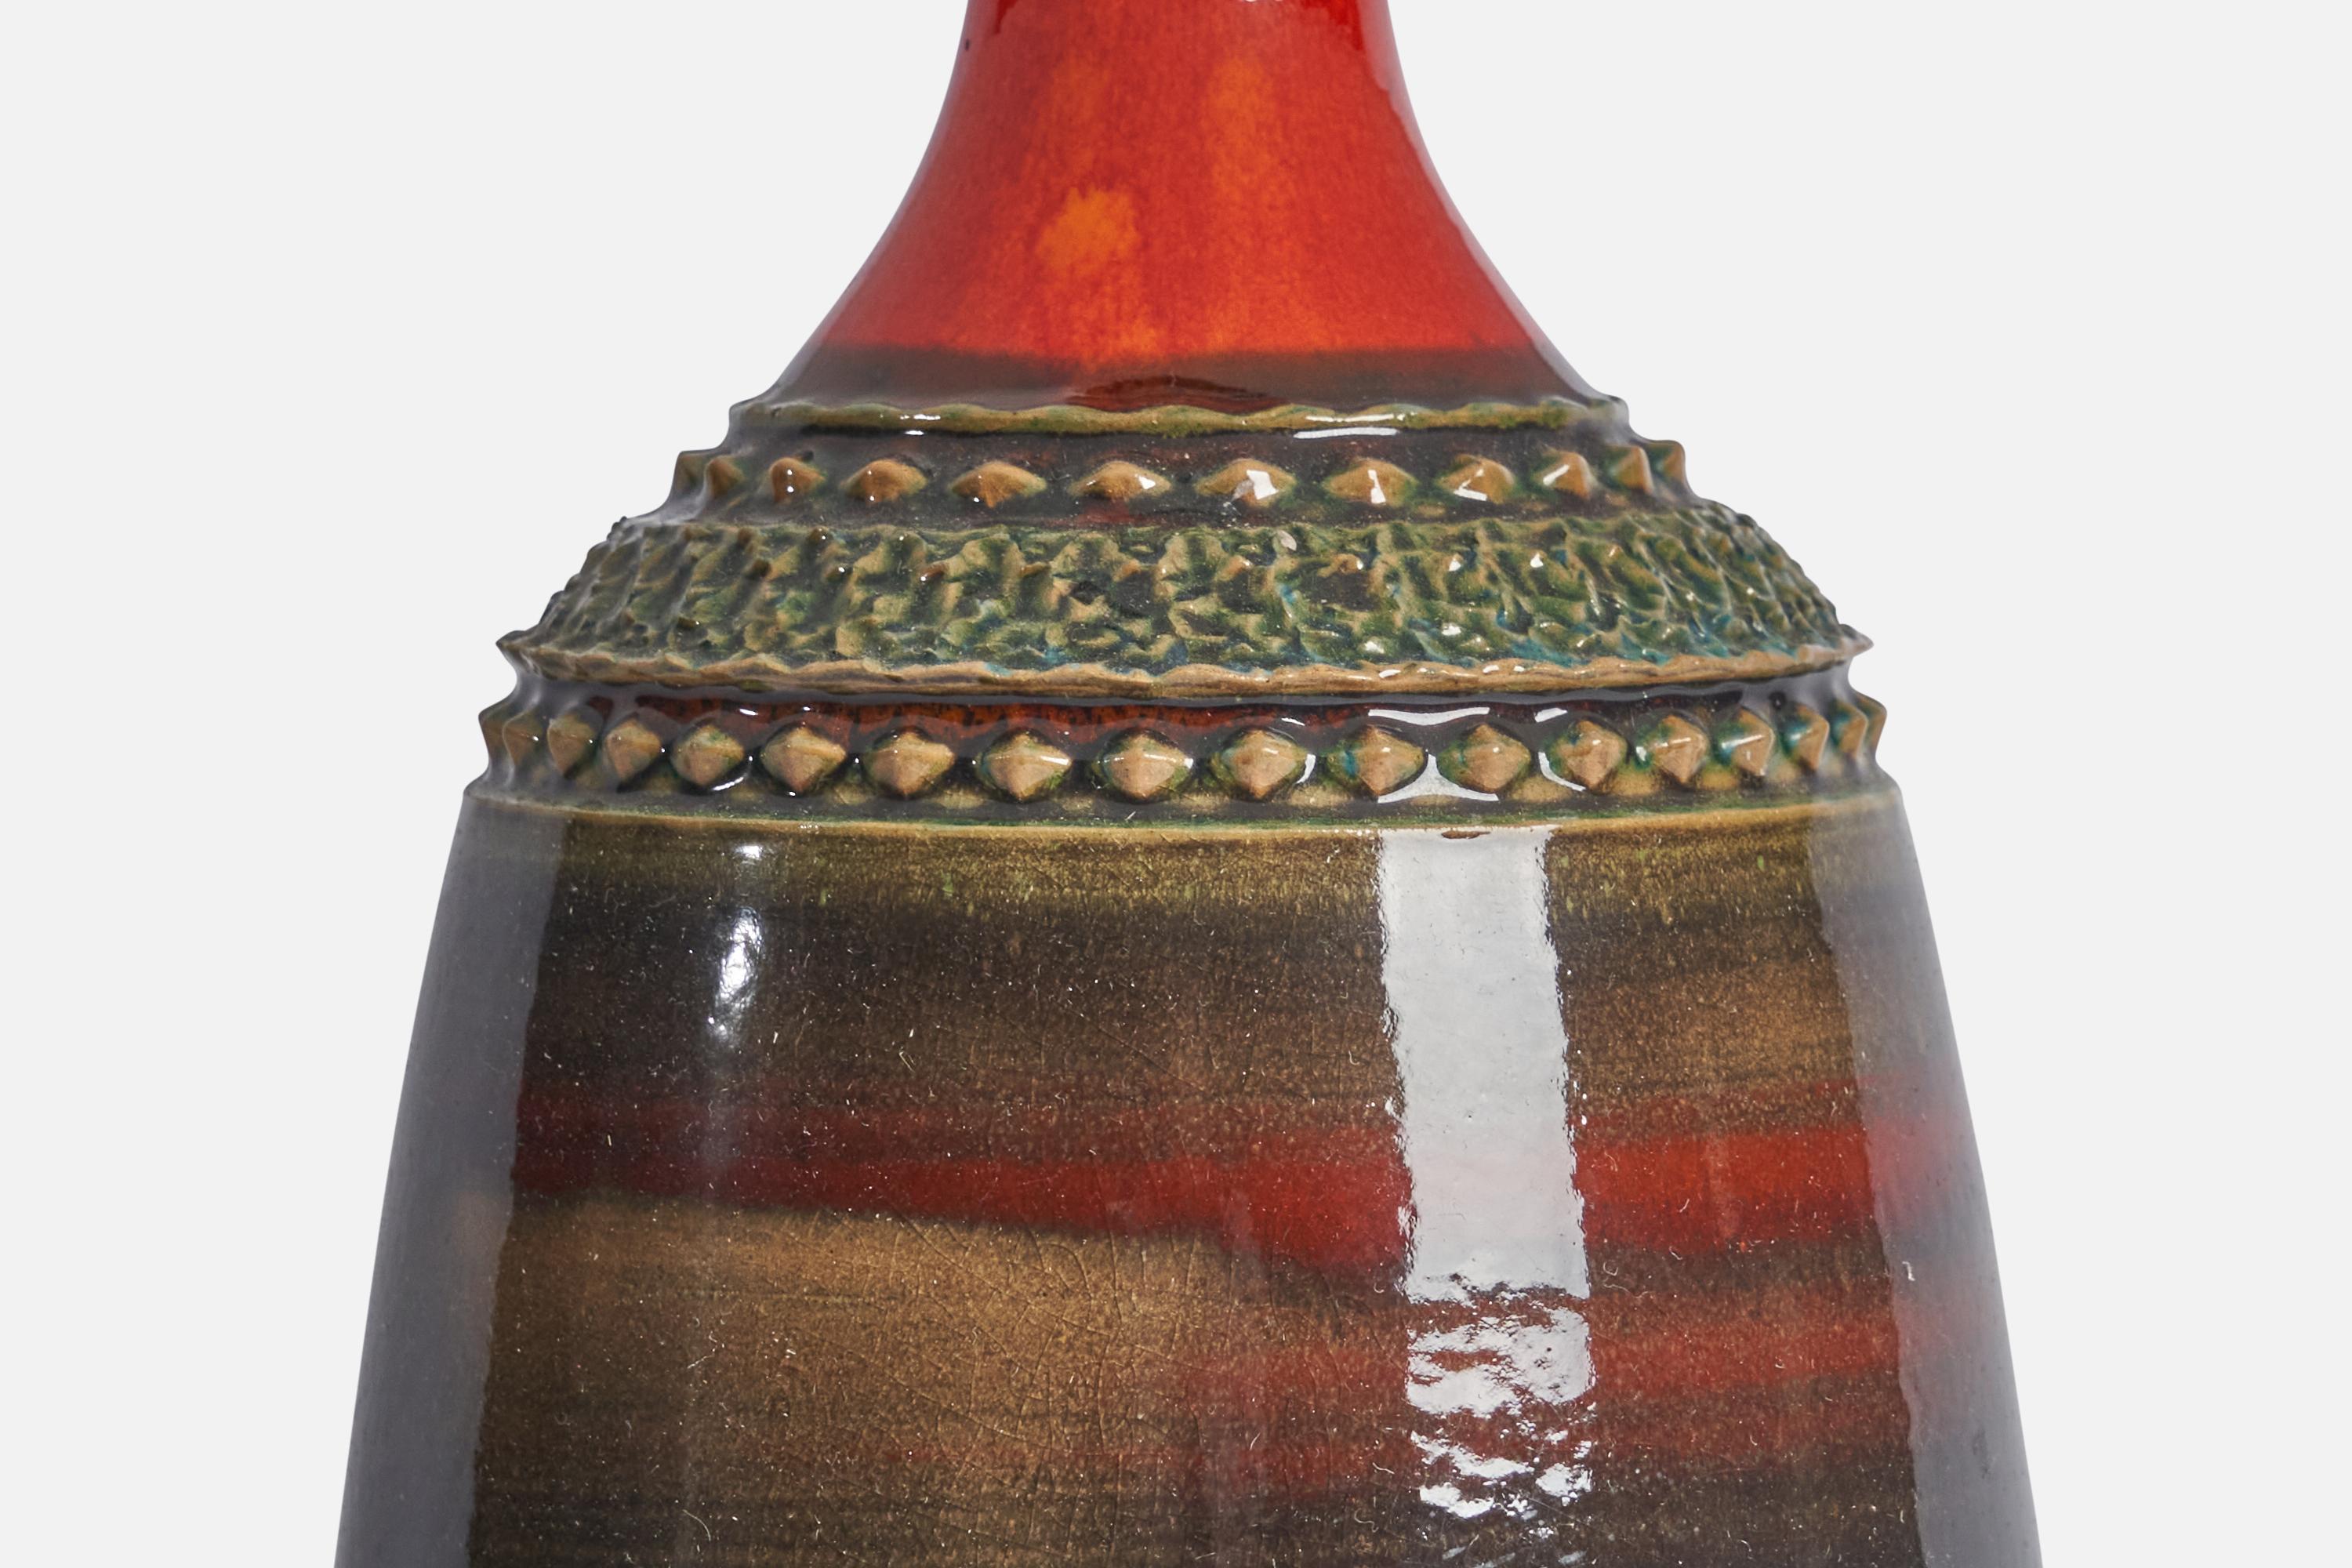 A red and green-glazed stoneware table lamp designed and produced by Klase Höganäs, Sweden, c. 1960s.

Dimensions of Lamp (inches): 15.75” H x 5.5” Diameter
Dimensions of Shade (inches): 4.5” Top Diameter x 16” Bottom Diameter x 7.25” H
Dimensions